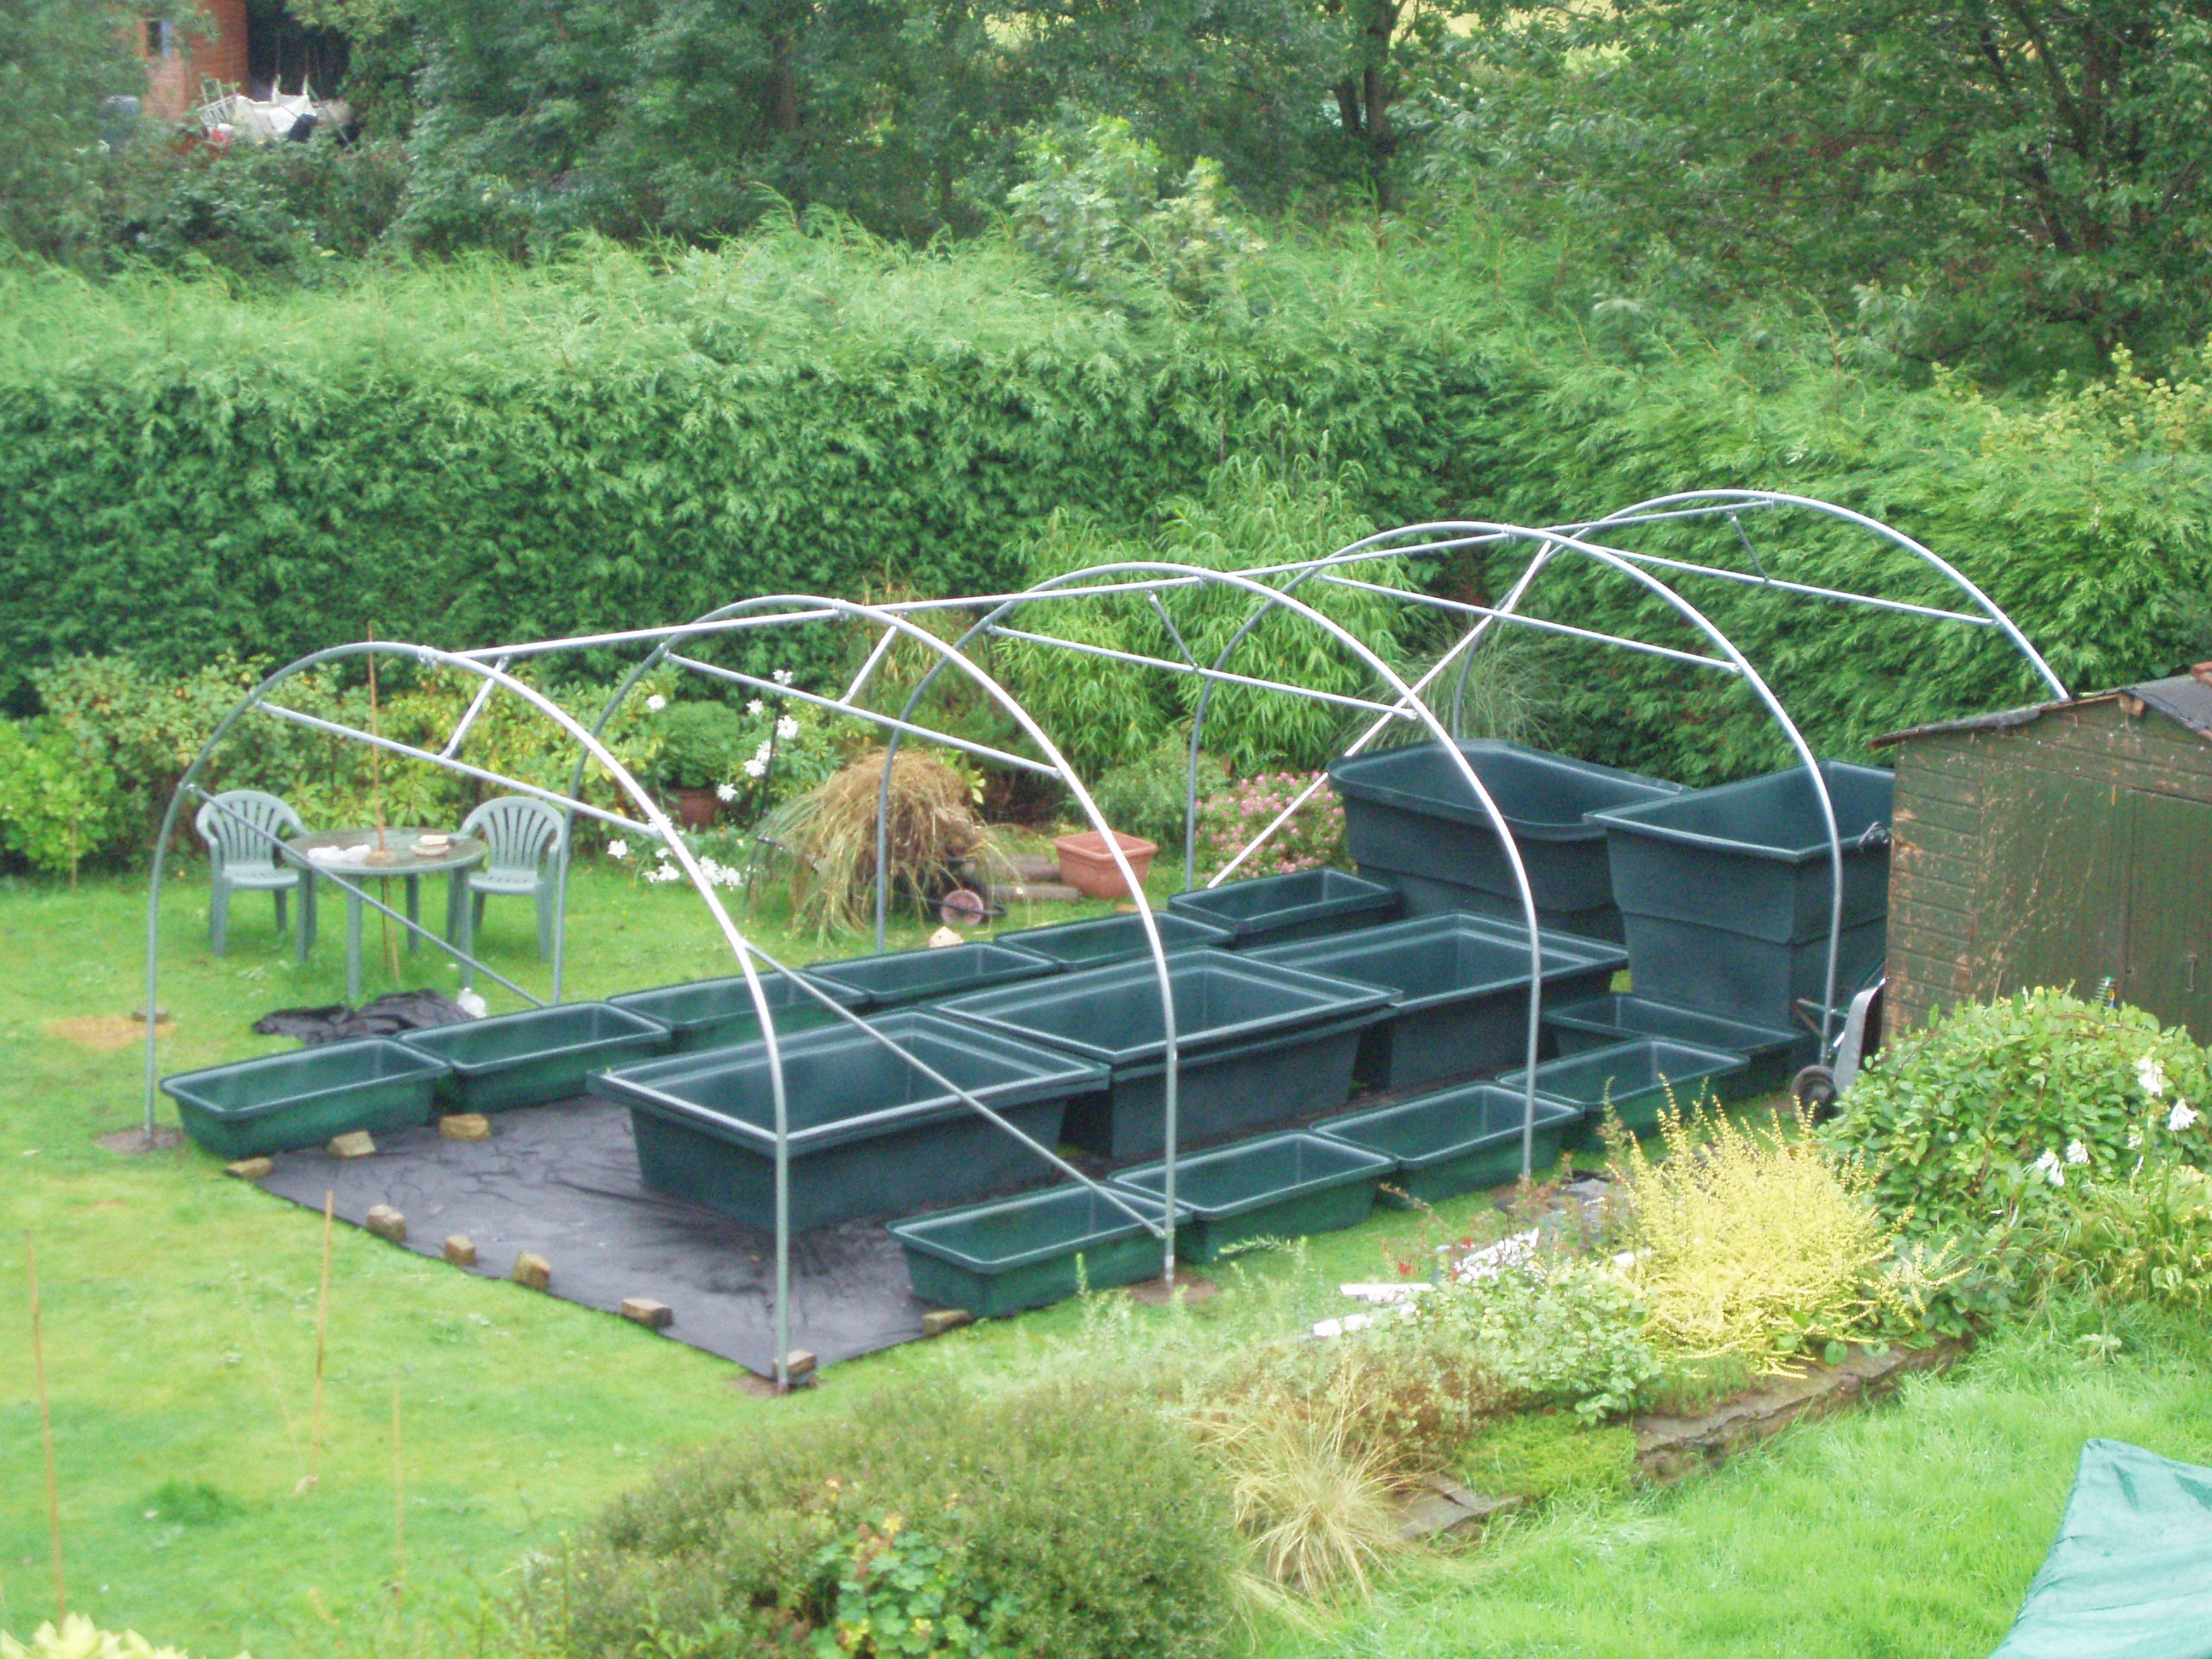 Polytunnel | Garden Aquaponics in the UK